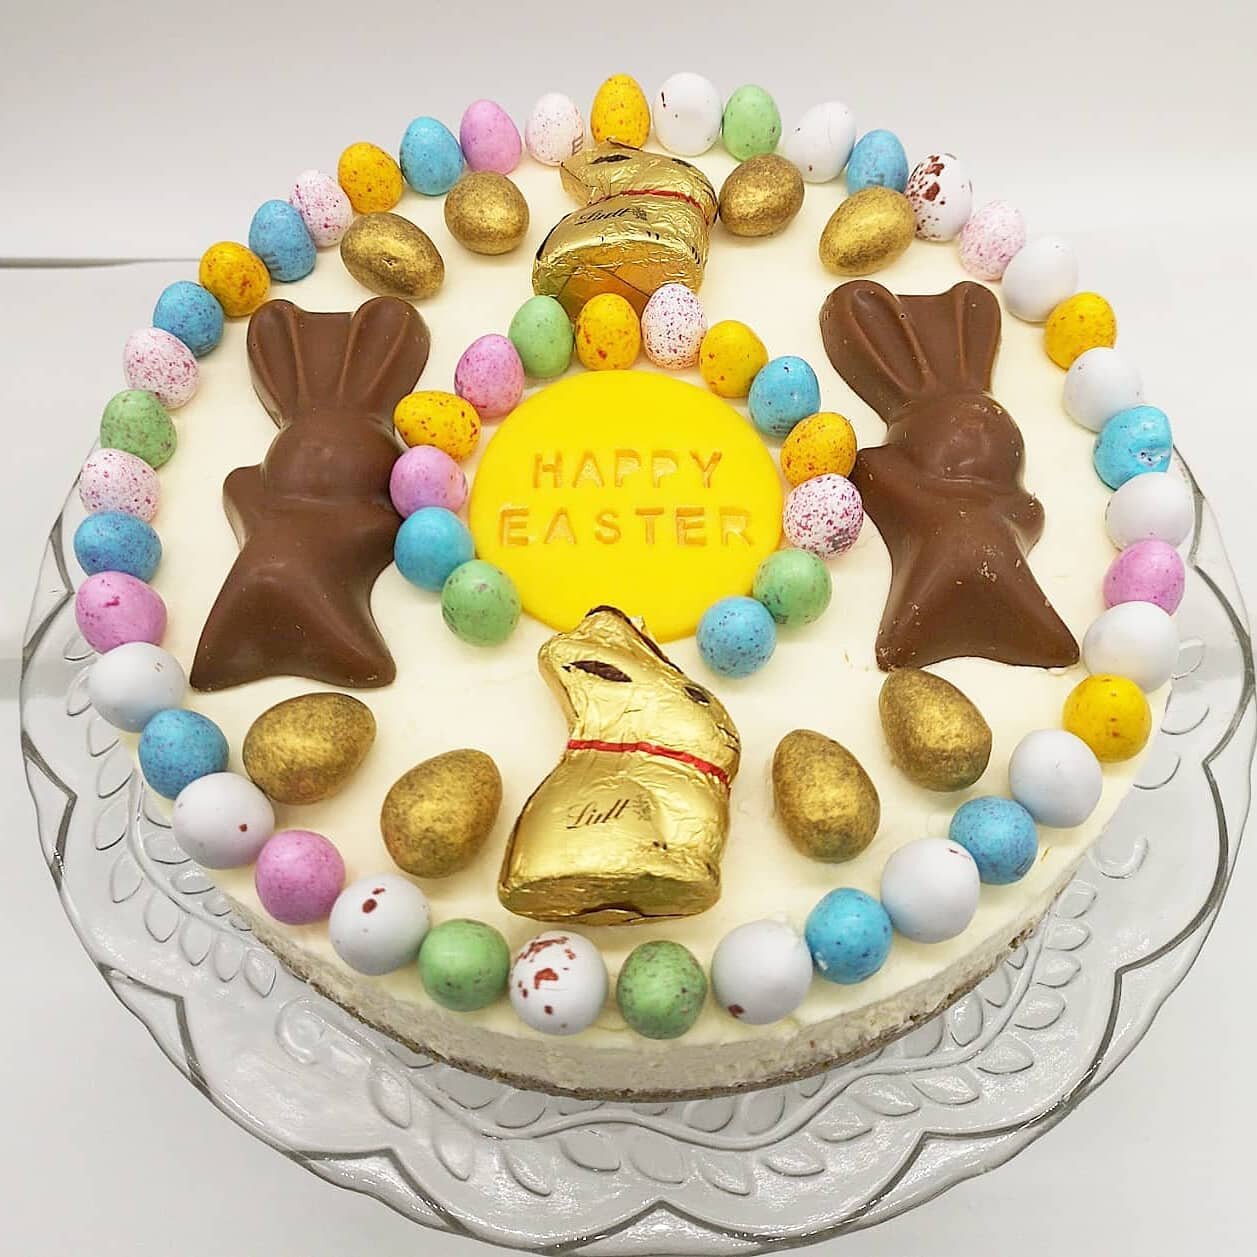 Our egg hunt cheesecake! 🥚🐣
*Available to order on our website!*
Digestive or Oreo base topped with a yummy vanilla flavour topping, and ALL of the Easter goodies! Eggscellent! 😆
.
.
#easter #eastercakes #easterpresent #easterbunny #easterbaking #